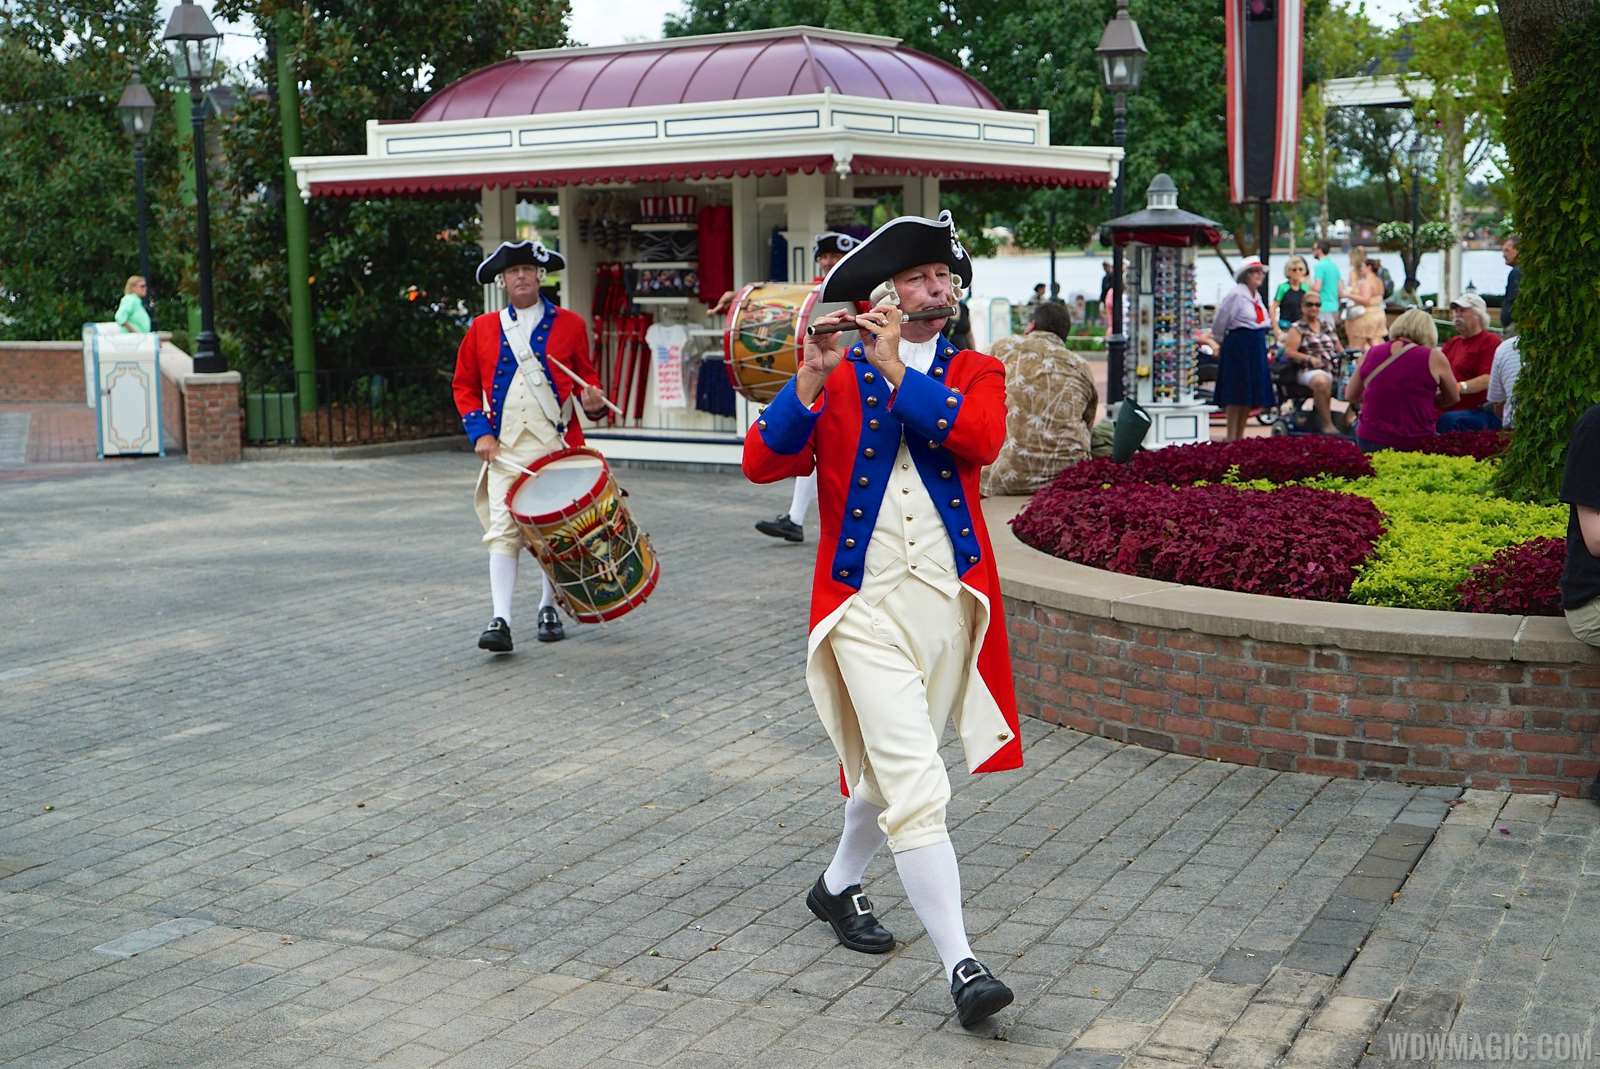 Image result for spirit of america fife and drum